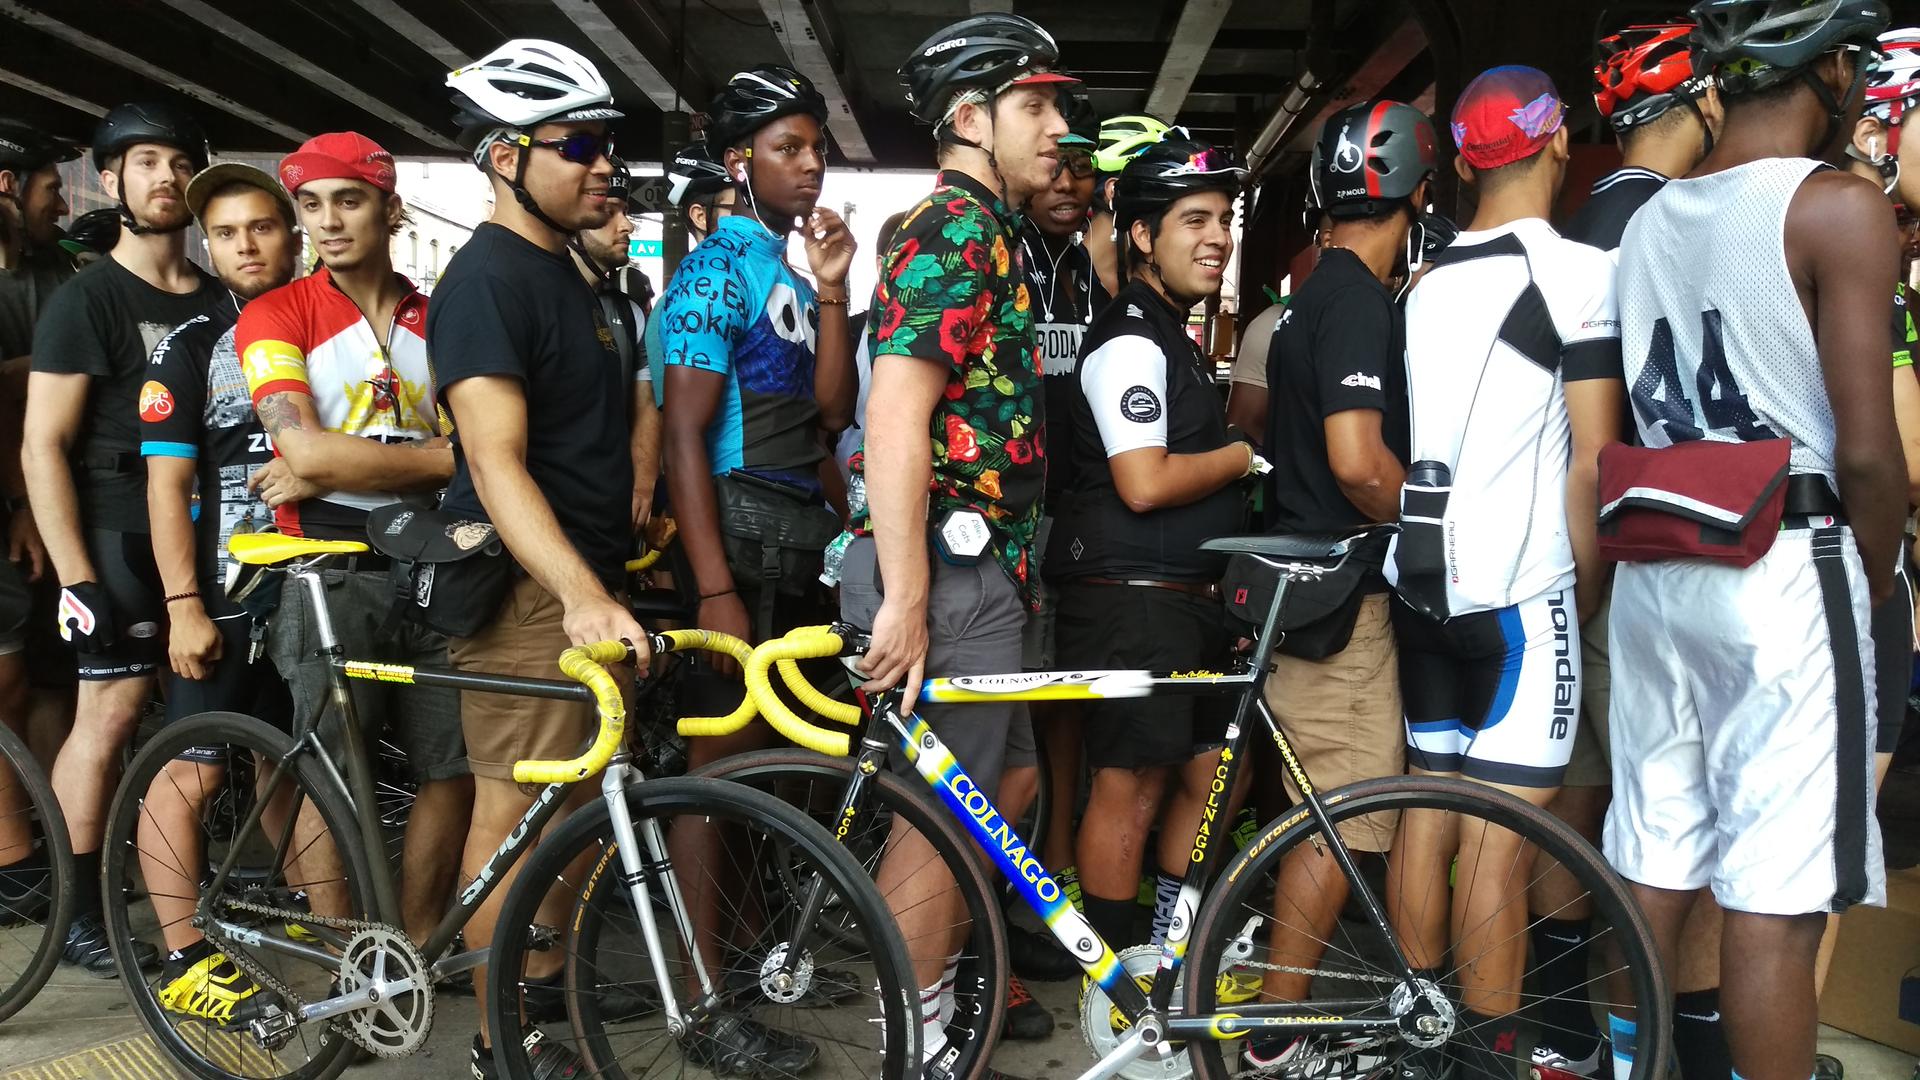 Racers lining up for their list of checkpoints at the Alleycat in New York in August. Most of the racers now aren't bike messengers.